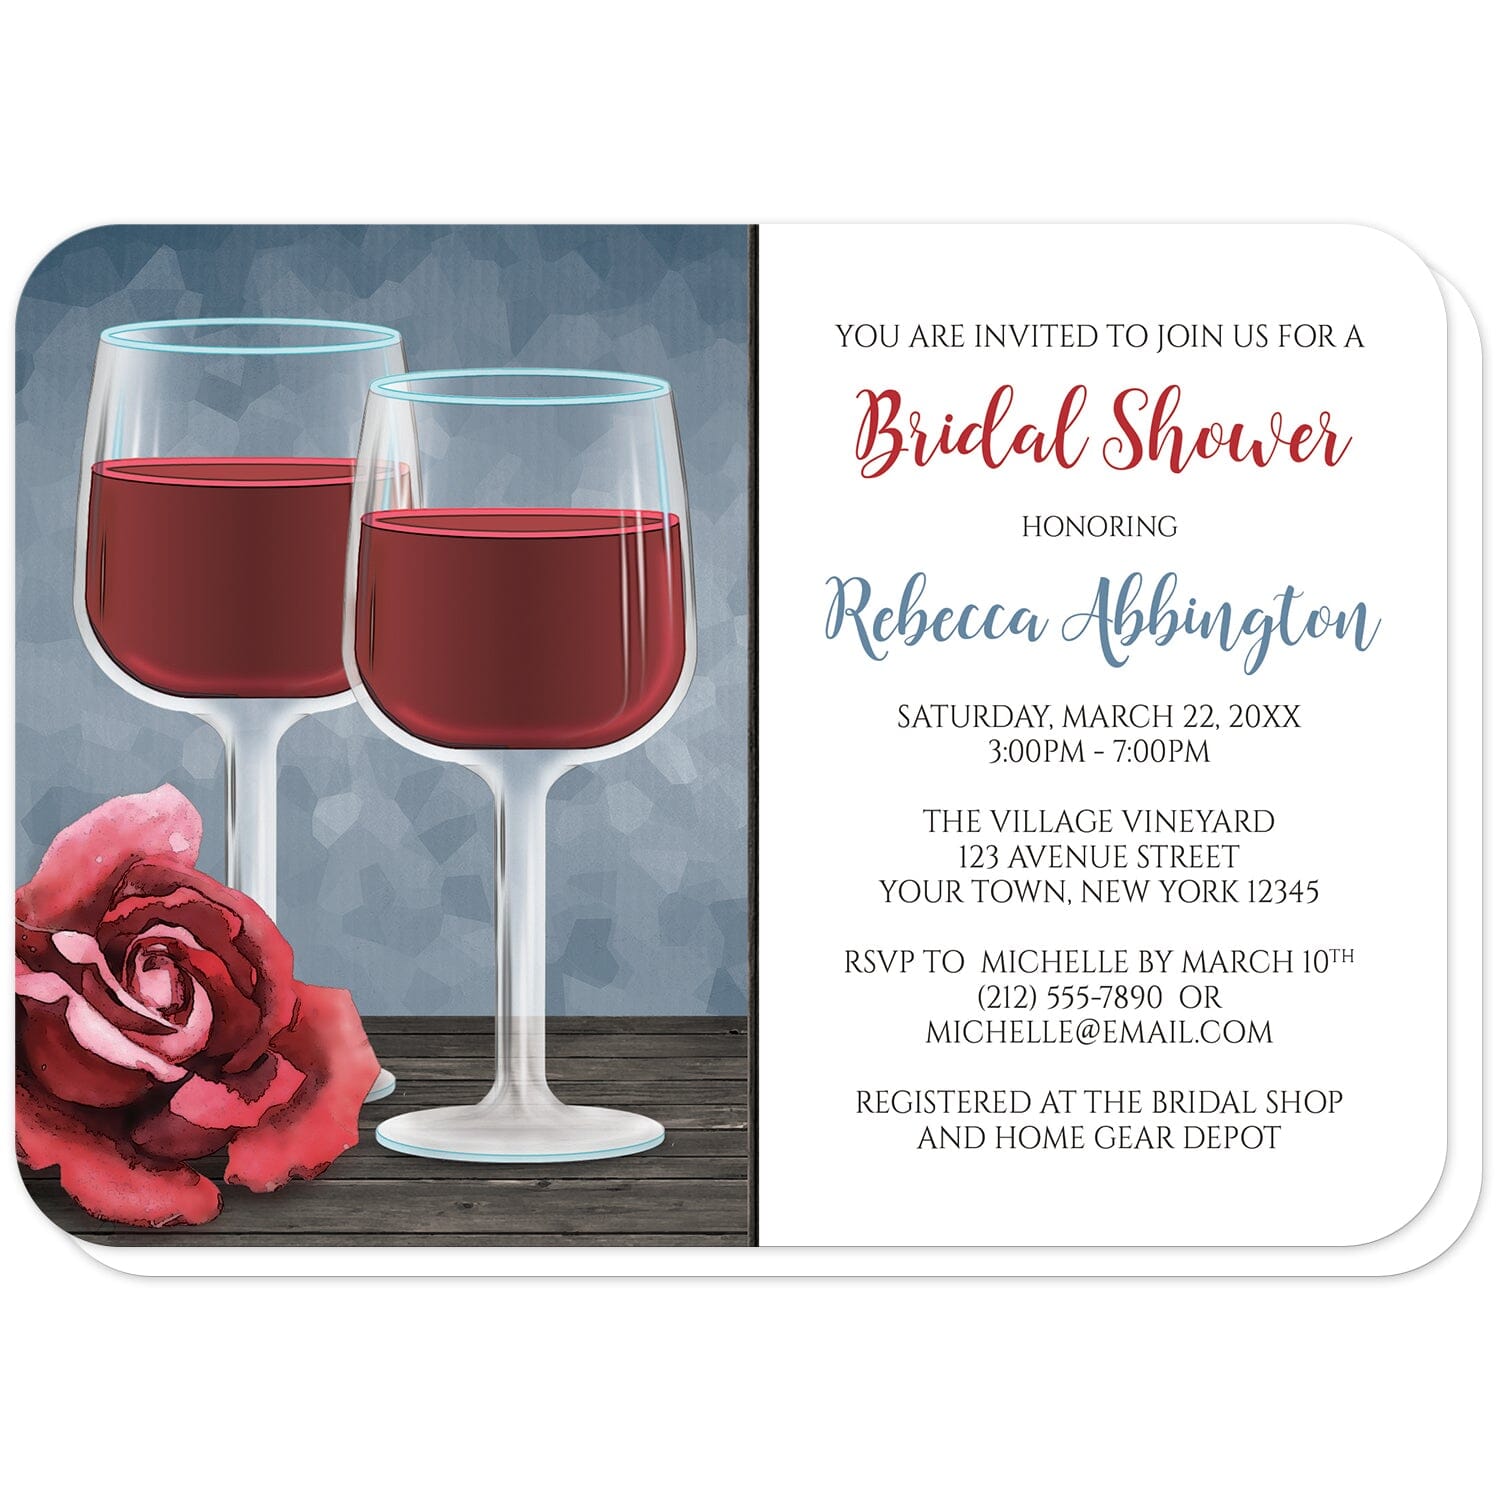 Red Wine Glasses Floral Rose Bridal Shower Invitations (with rounded corners) at Artistically Invited. Uniquely illustrated red wine glasses floral rose bridal shower invitations with two wine glasses filled with red wine on a wooden table with a red rose over a blue background design. Your personalized bridal shower celebration details are printed in red, blue, and dark brown over a white area to the right of the wine glass illustration.